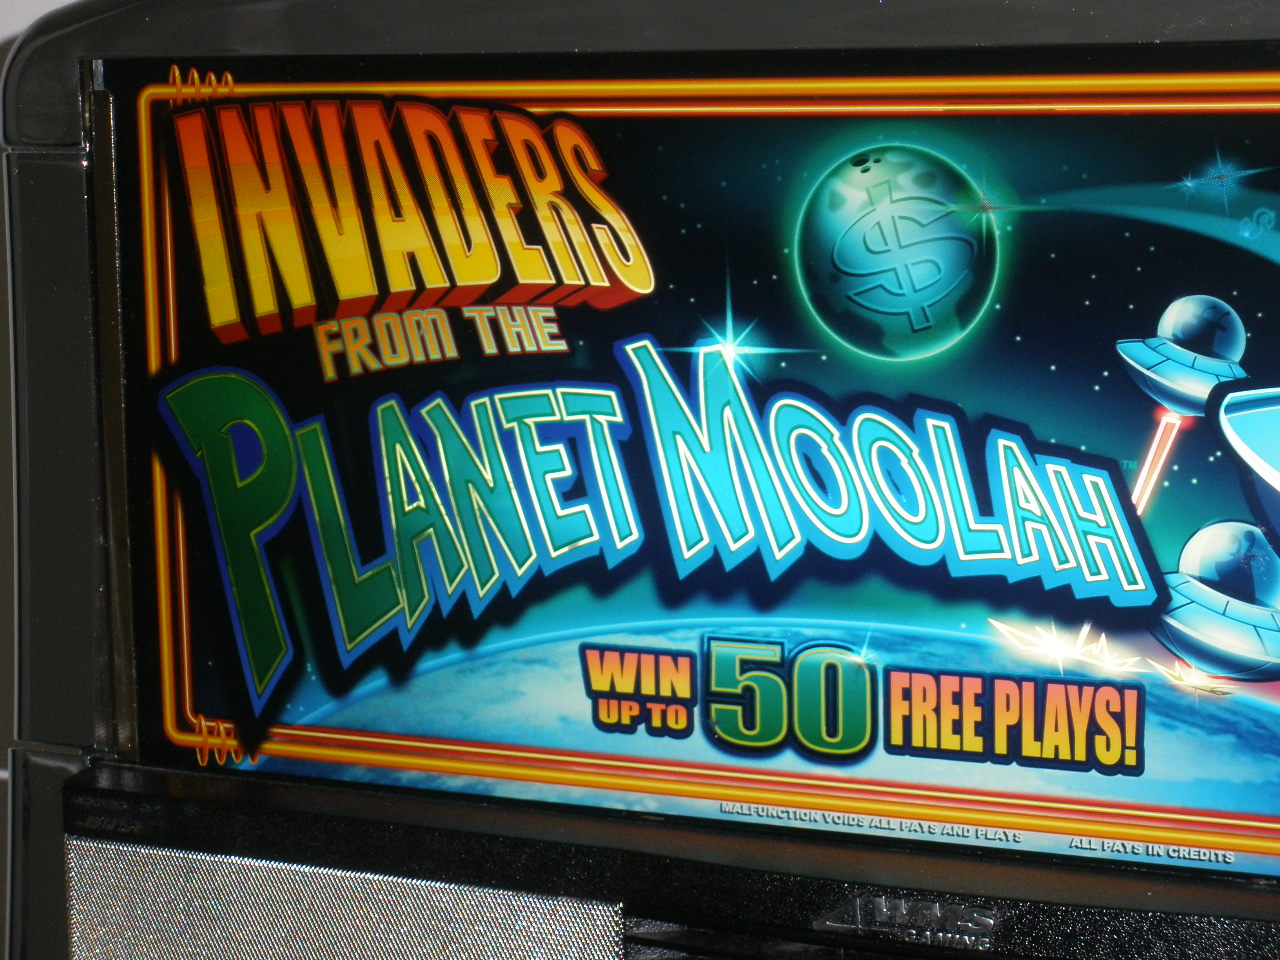 Invaders from the planet moolah slot machine for sale